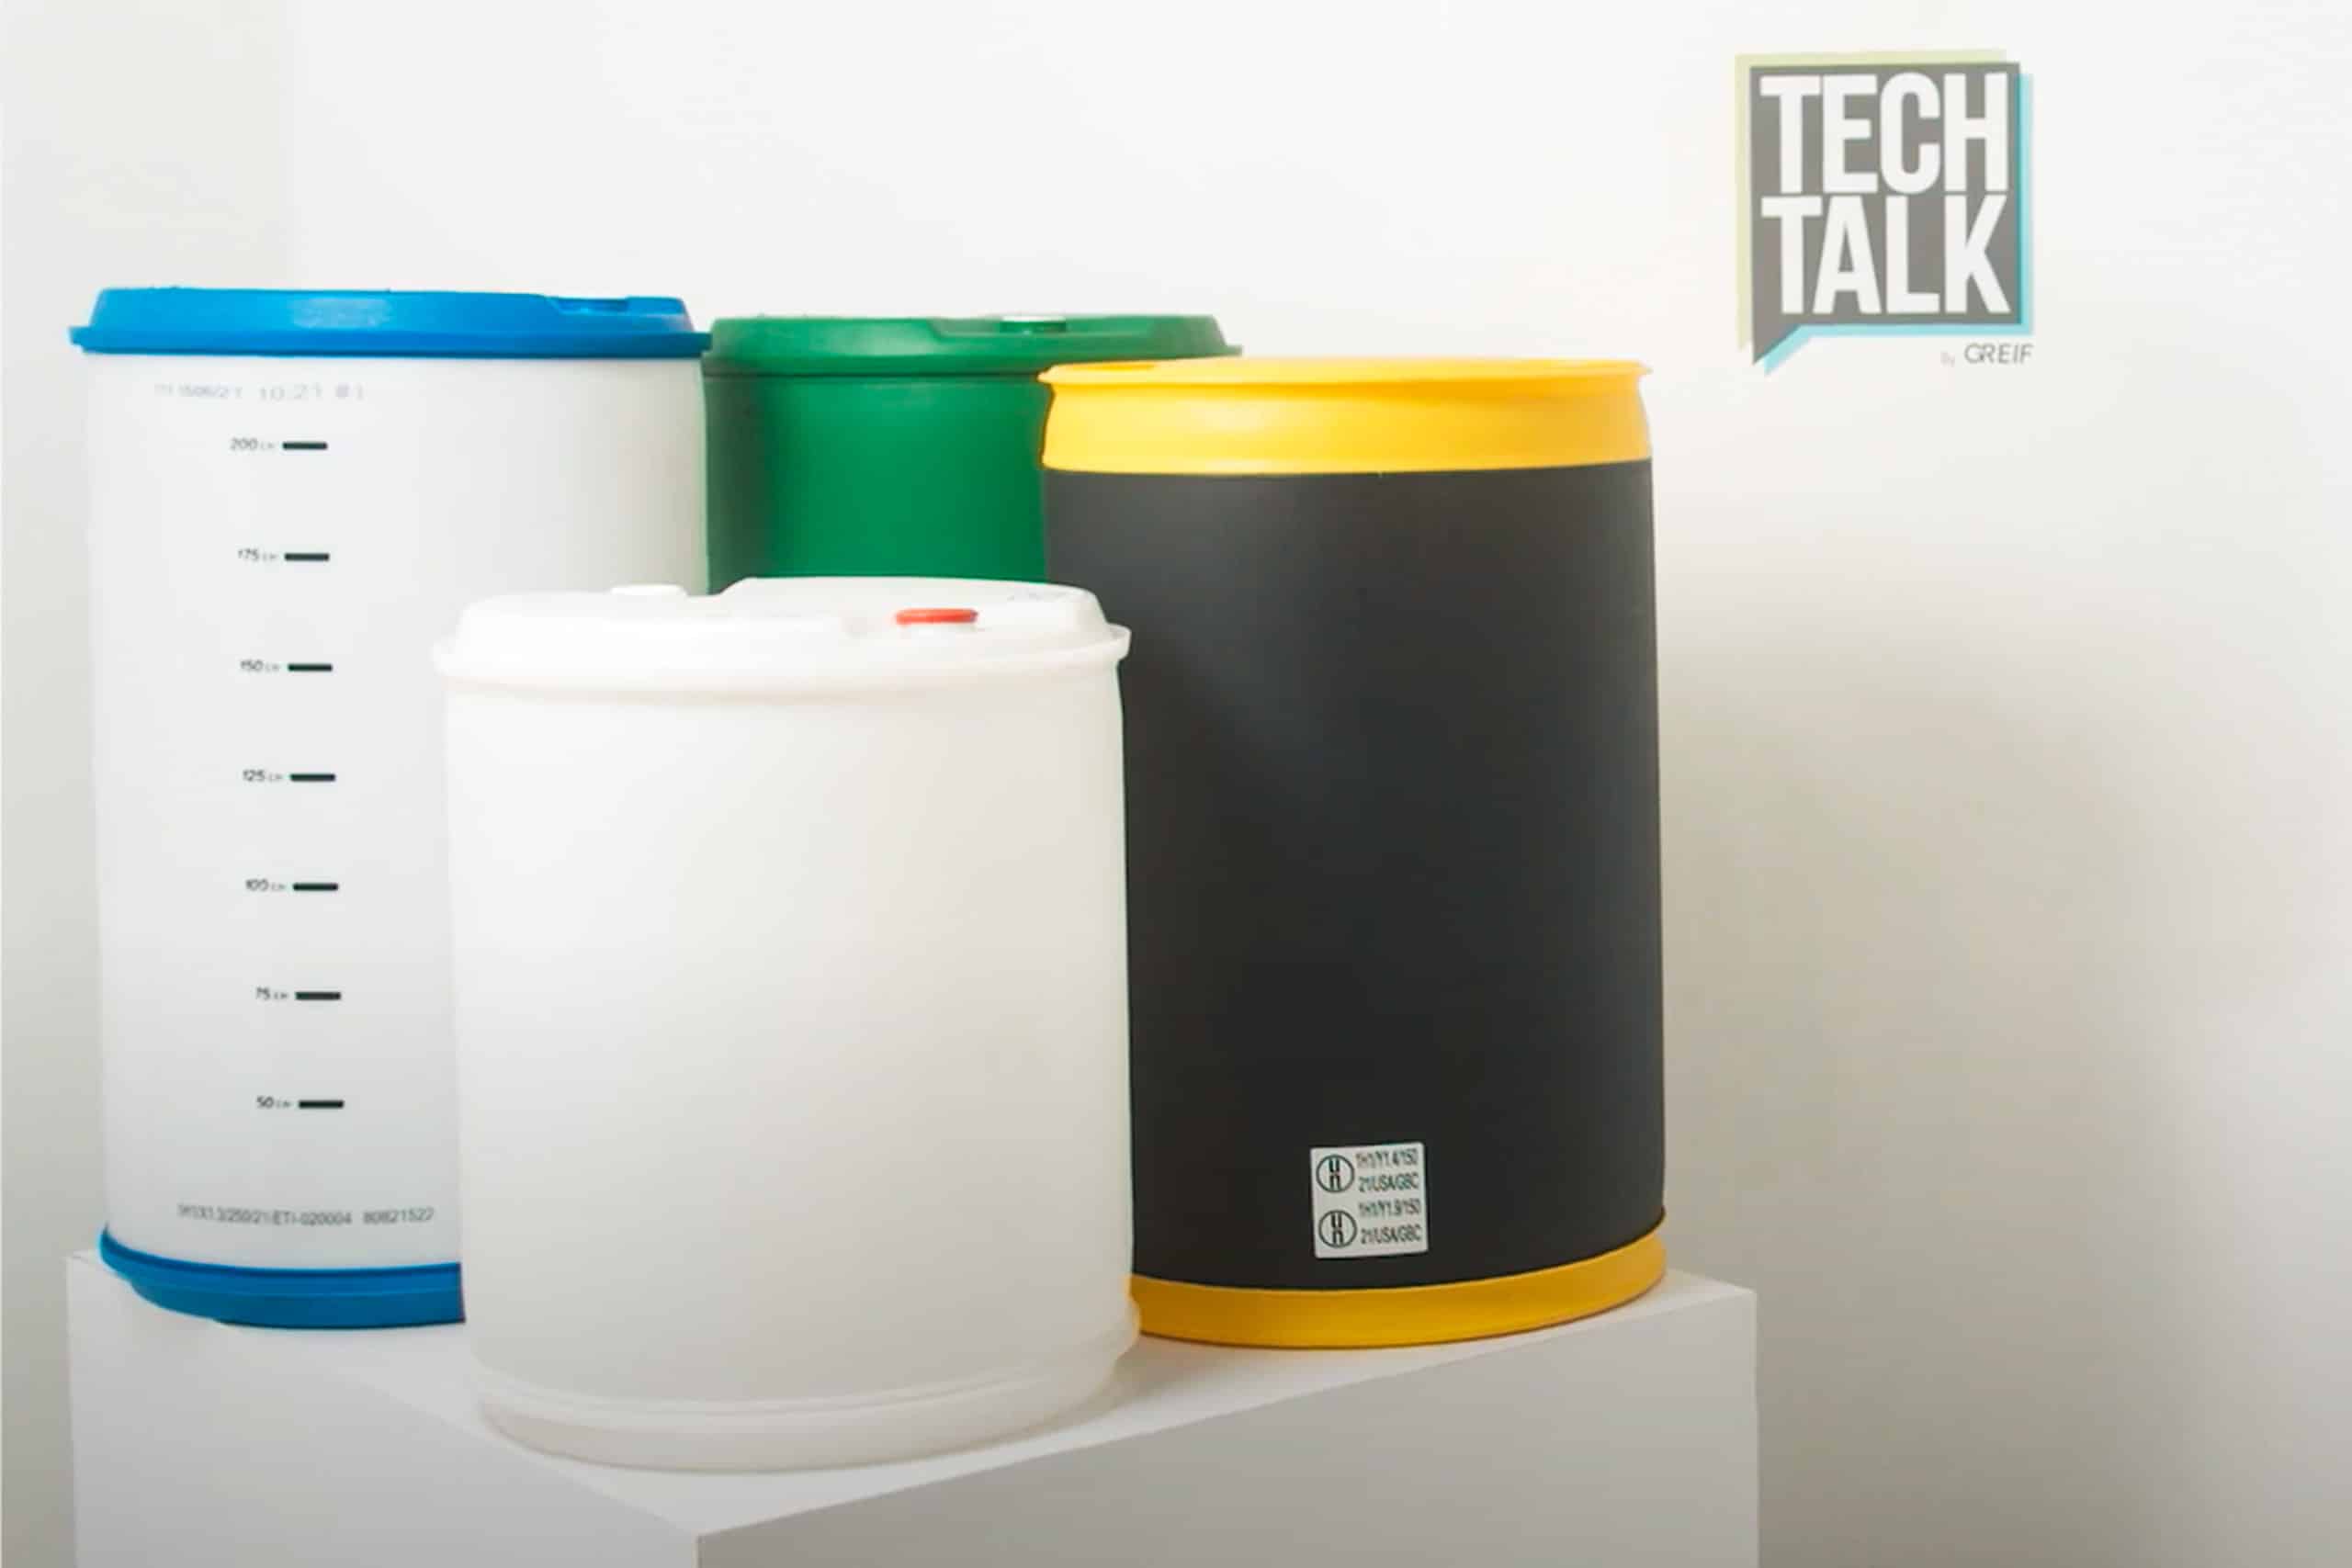 A Greif Tech Talk showing off the many plastic drums offered by the company